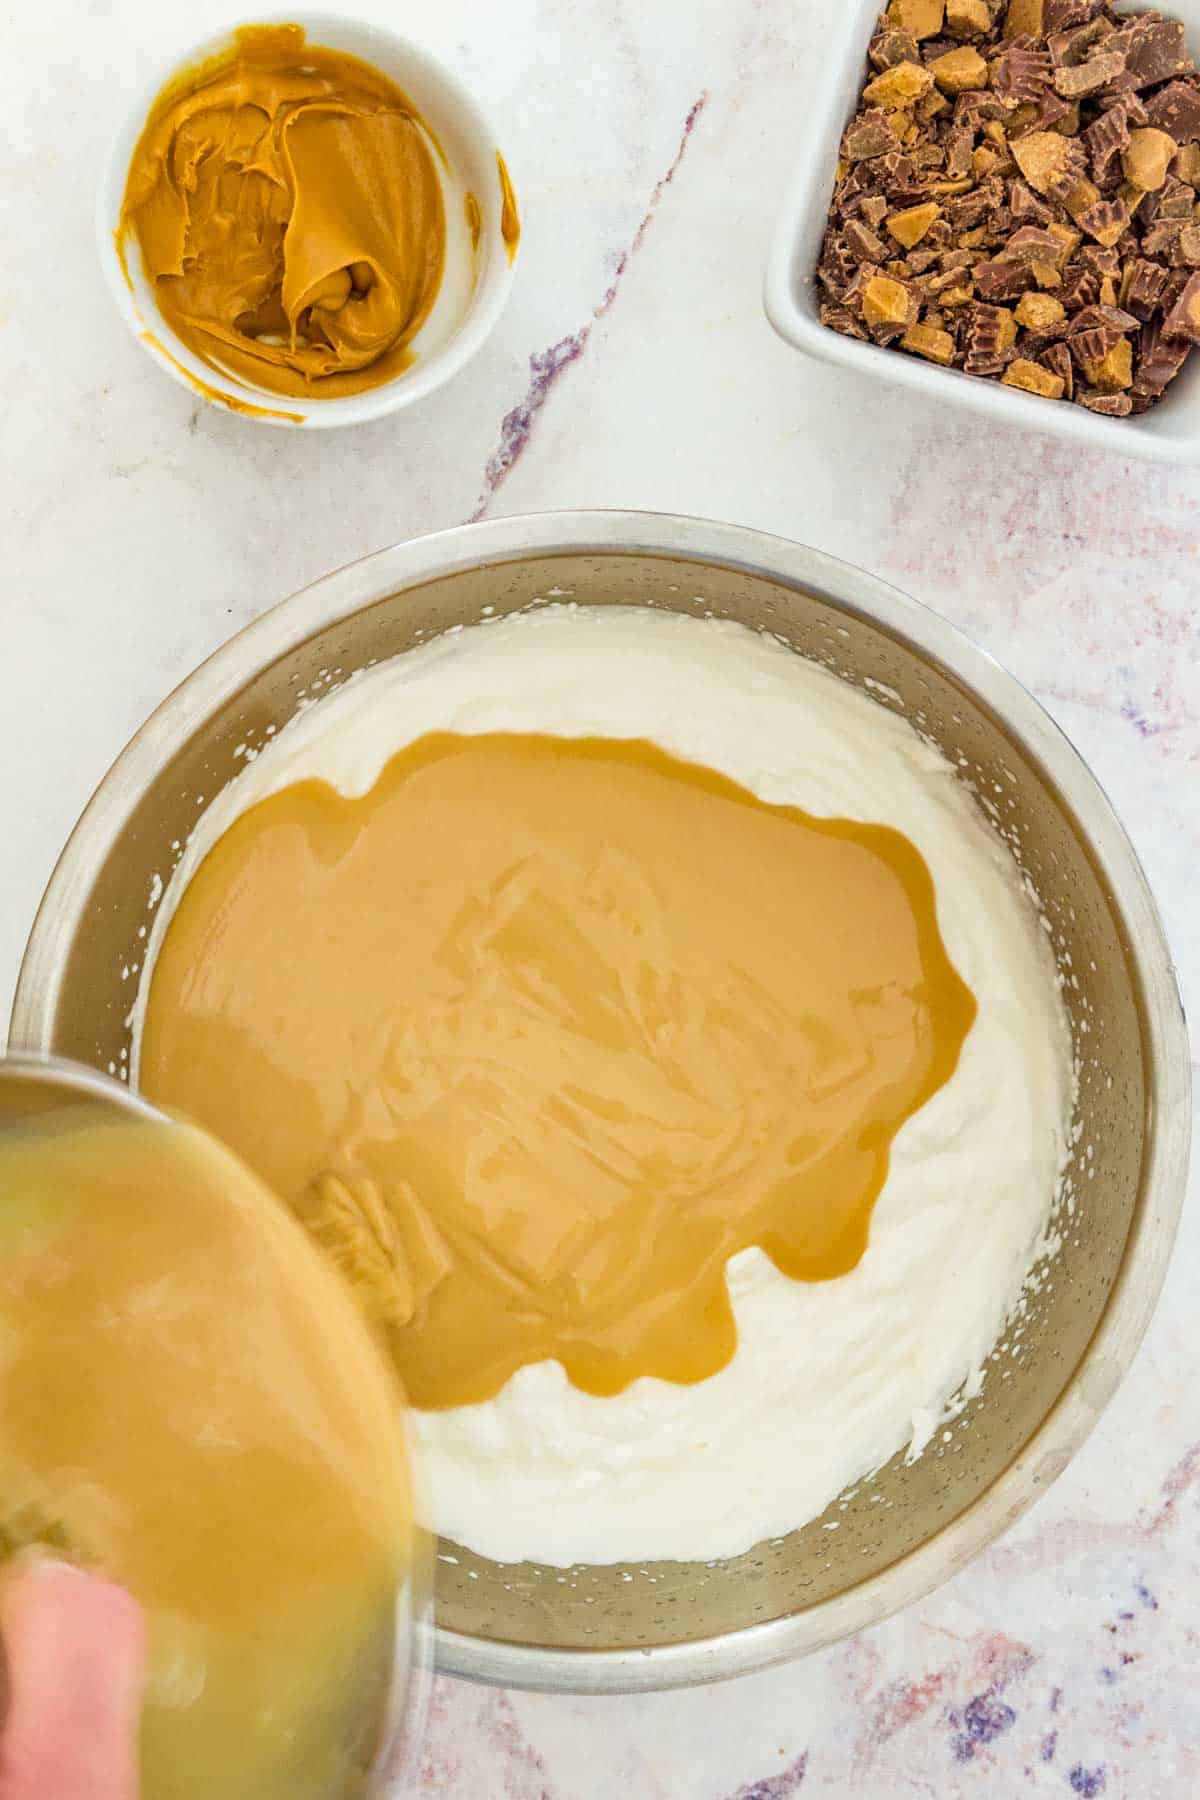 Peanut butter and condensed milk being added to whipped cream.